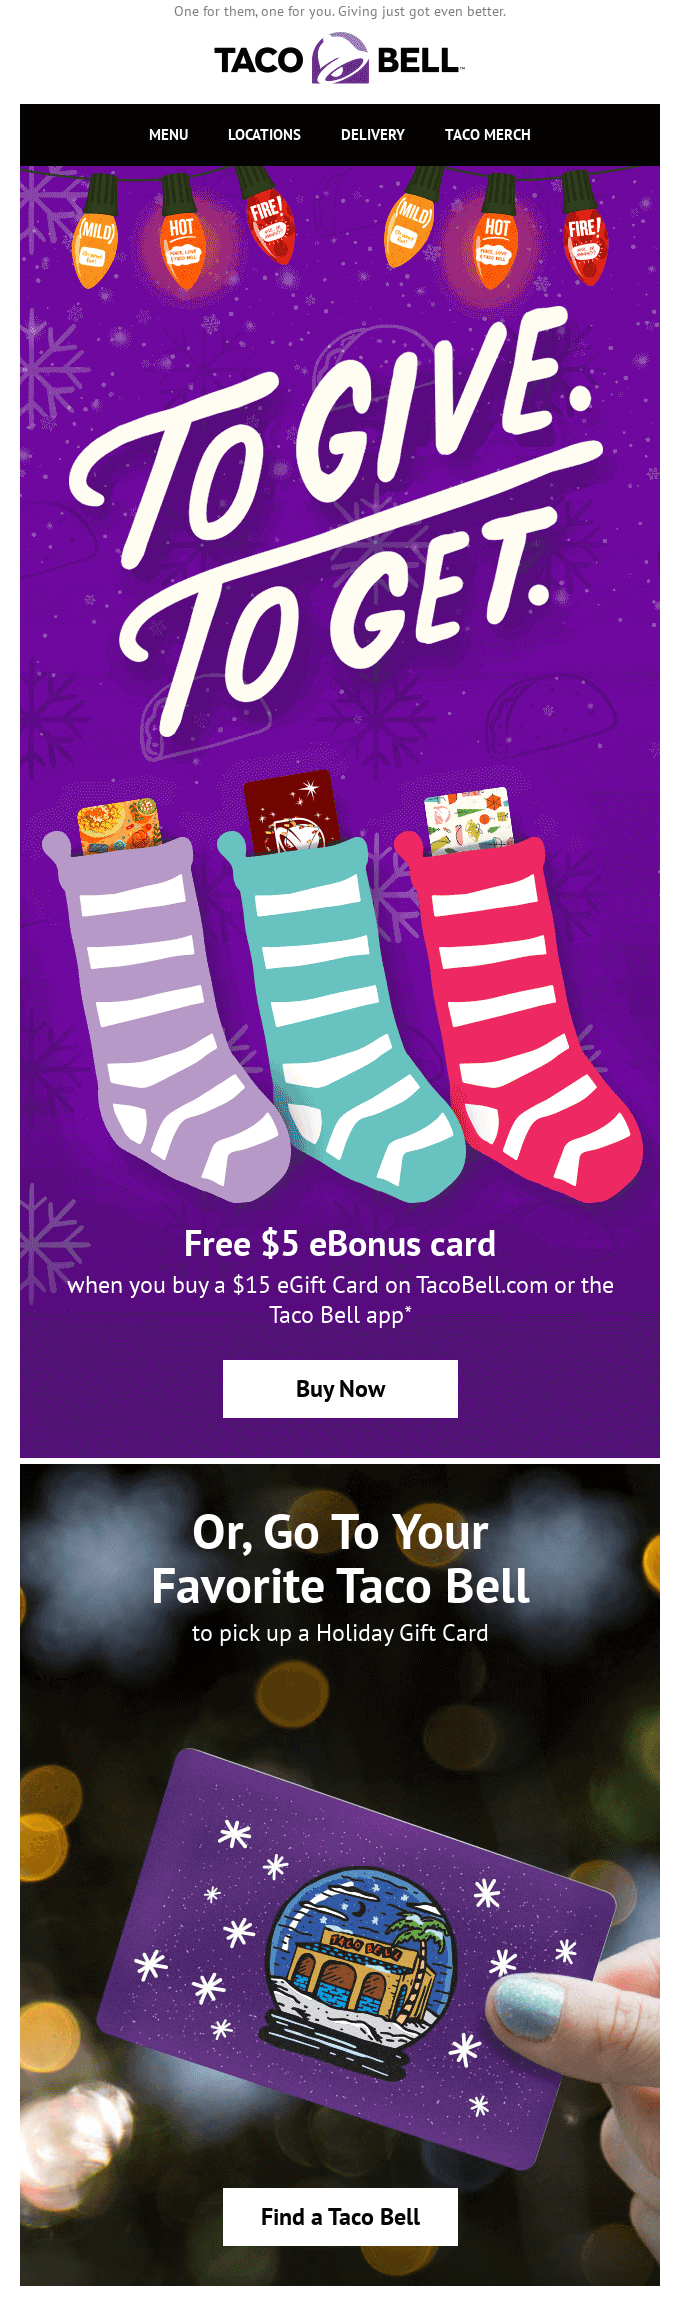 Taco Bell Holiday Email